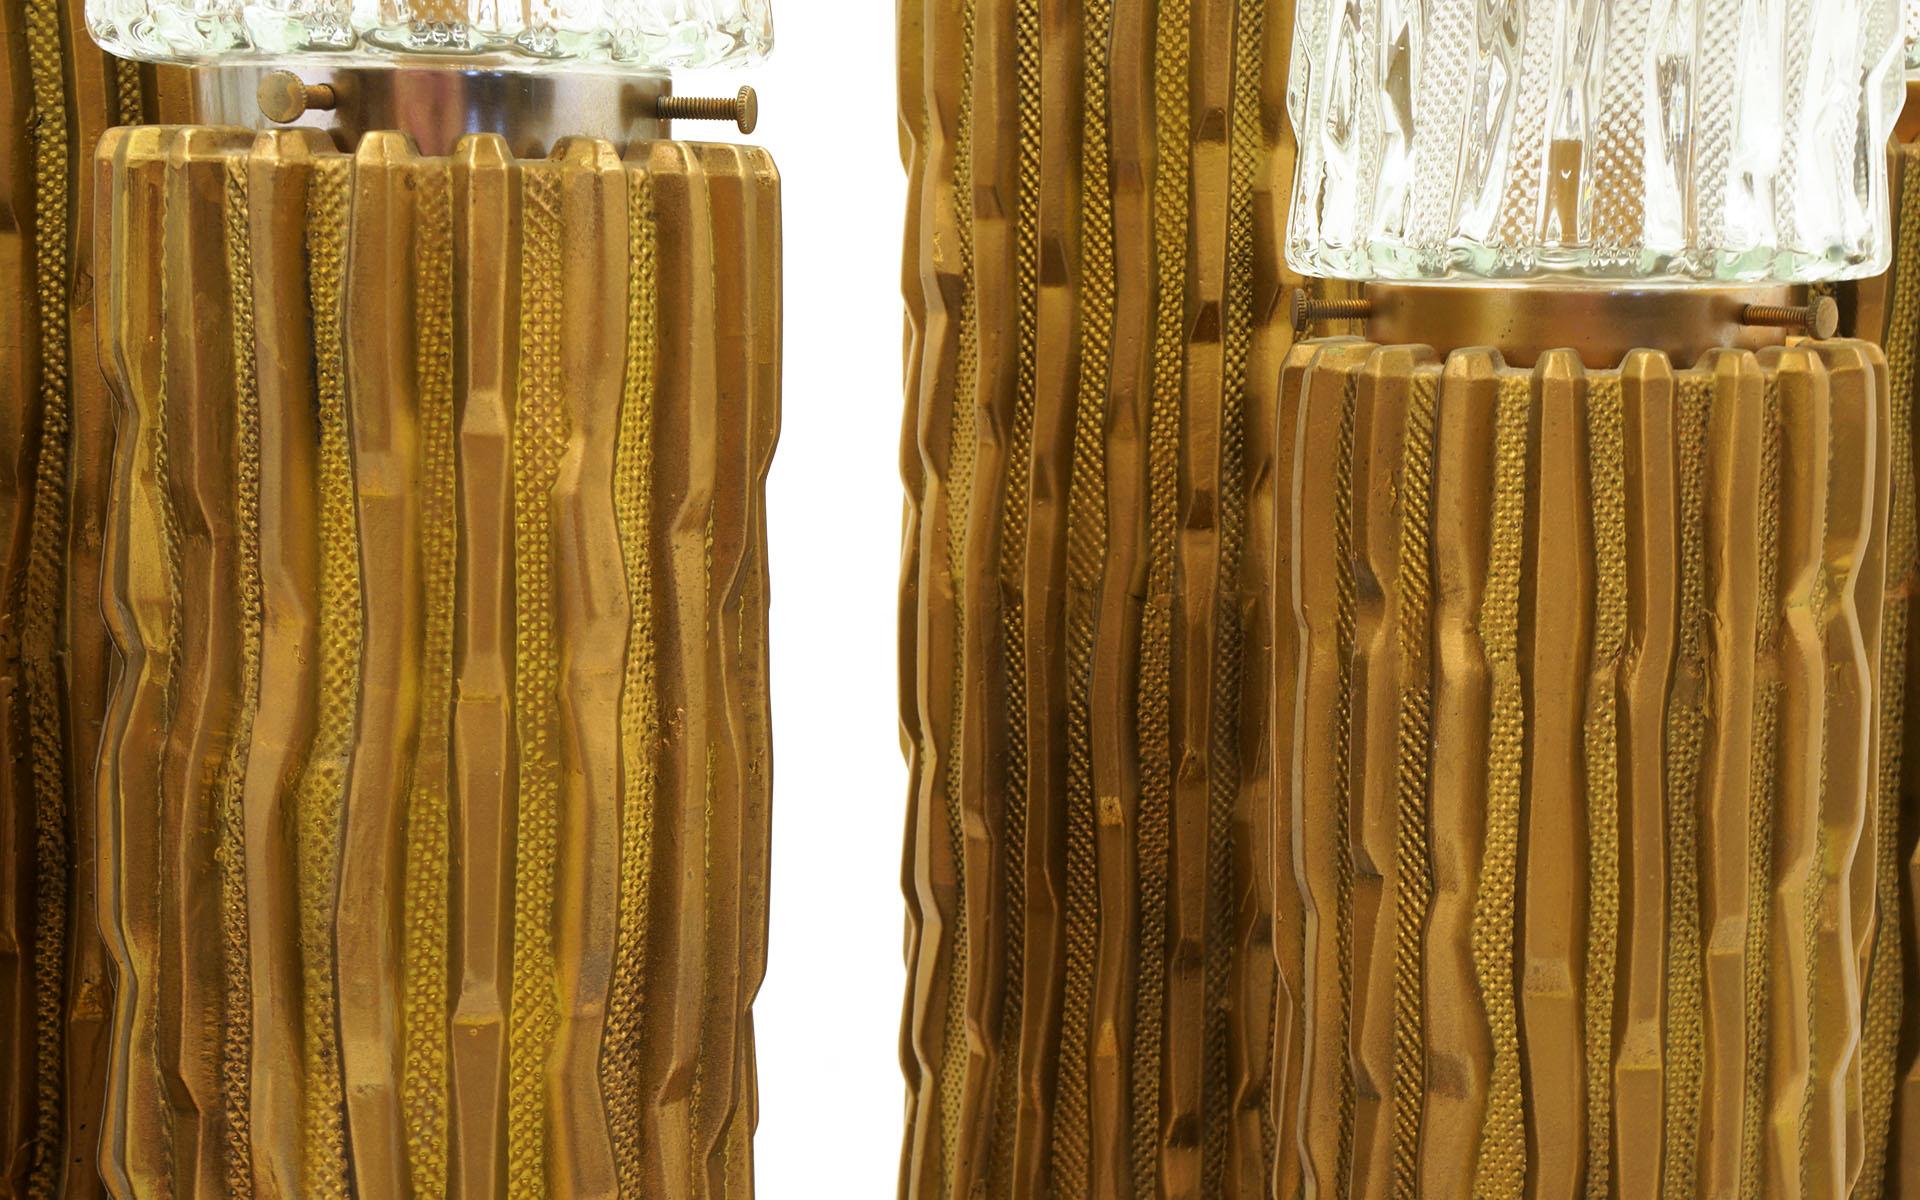 Glass Large Pair of Gold Leaf Cactus Table Lamps by Fuggiti Studios, 1971, Excellent 